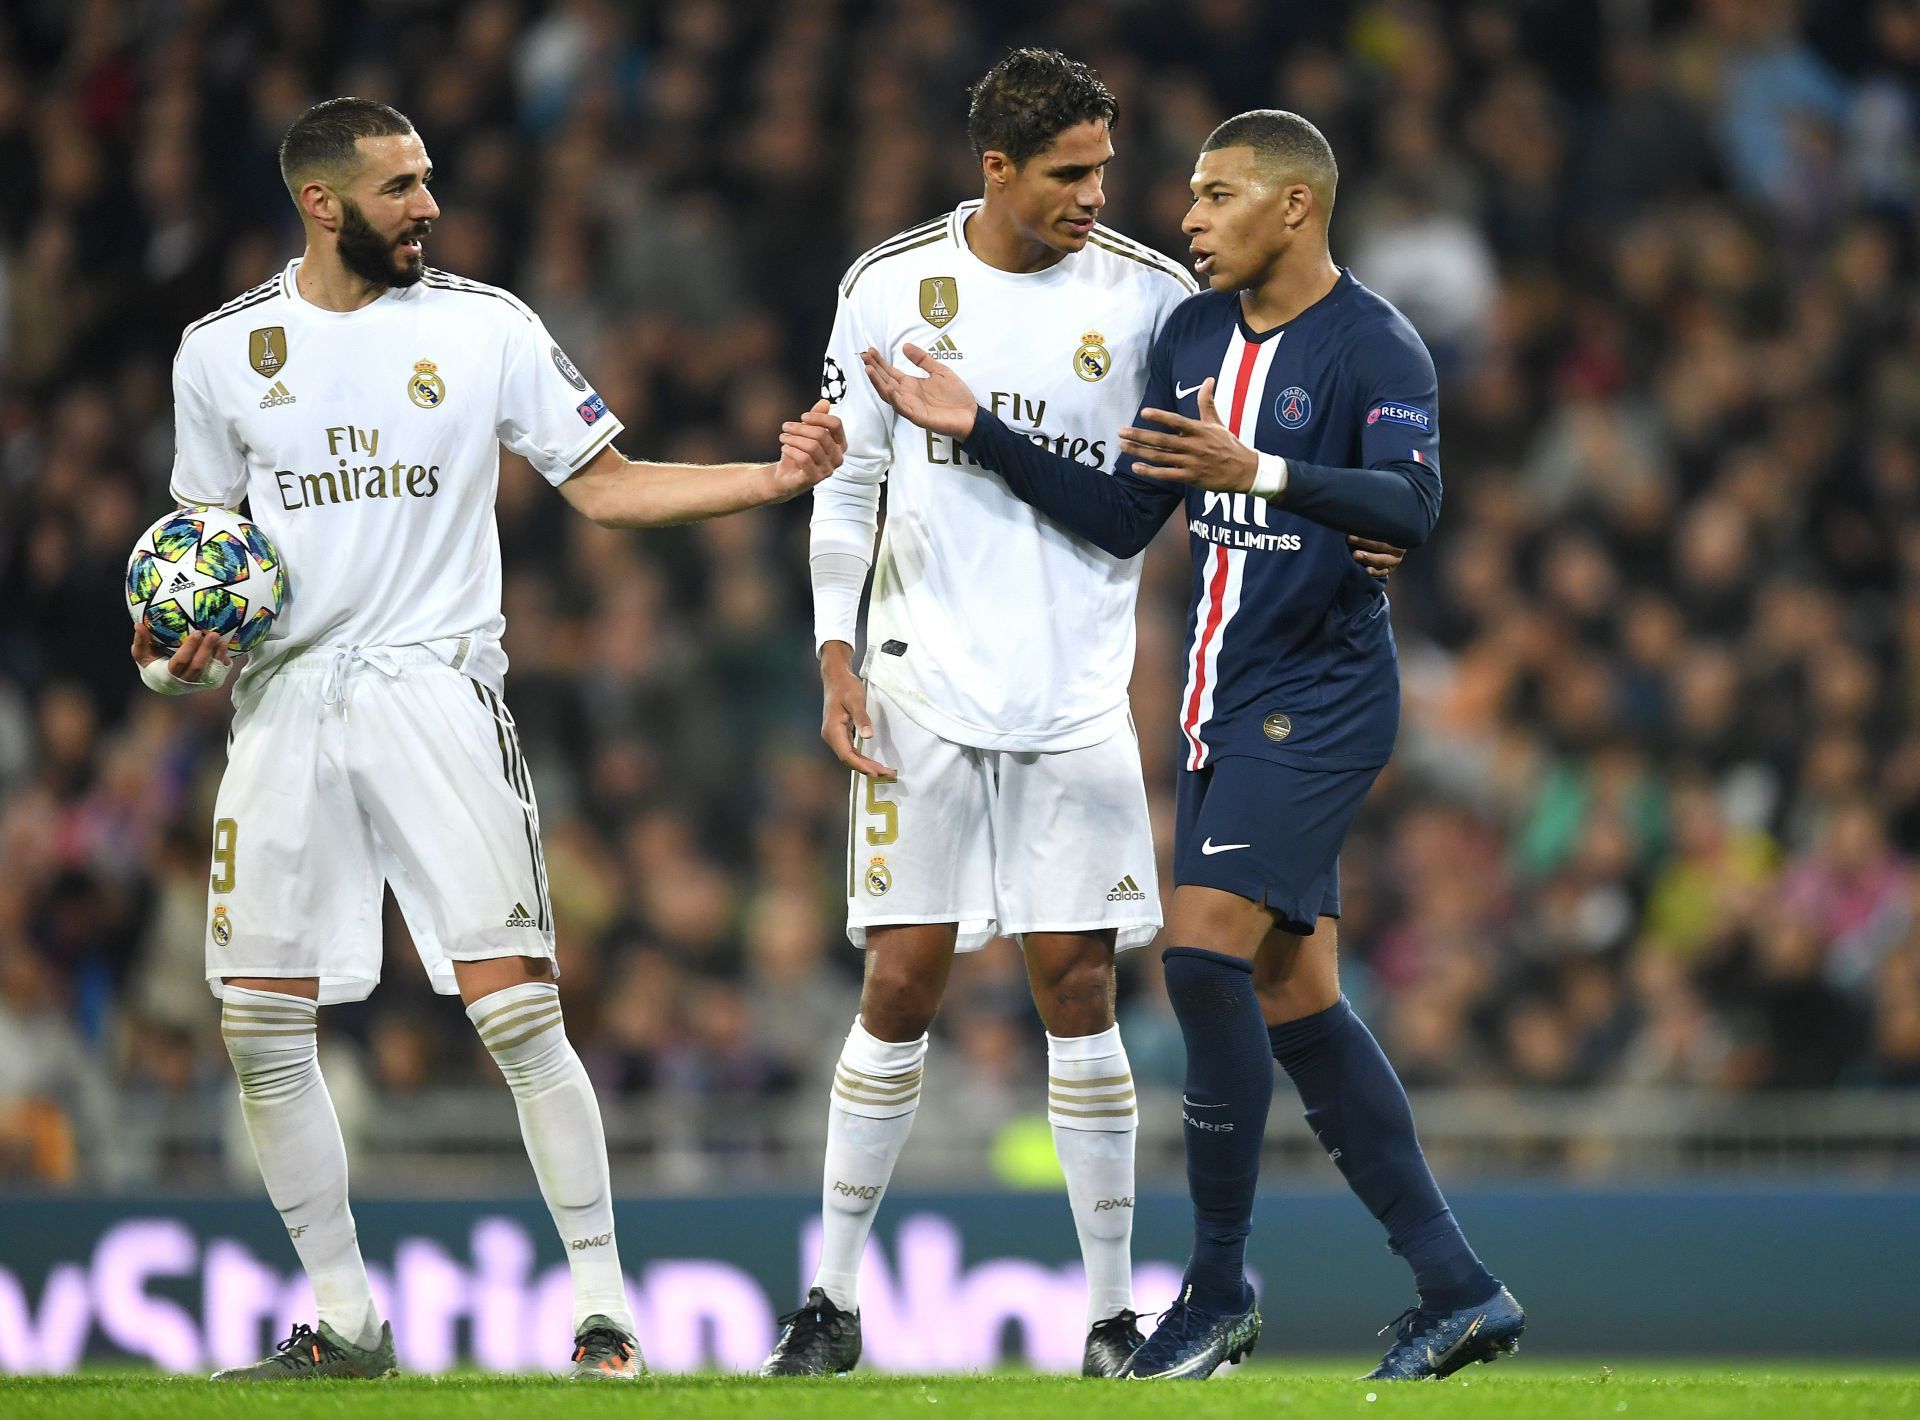 Both Benzema (left) and Mbappe (right) could be set for moves.